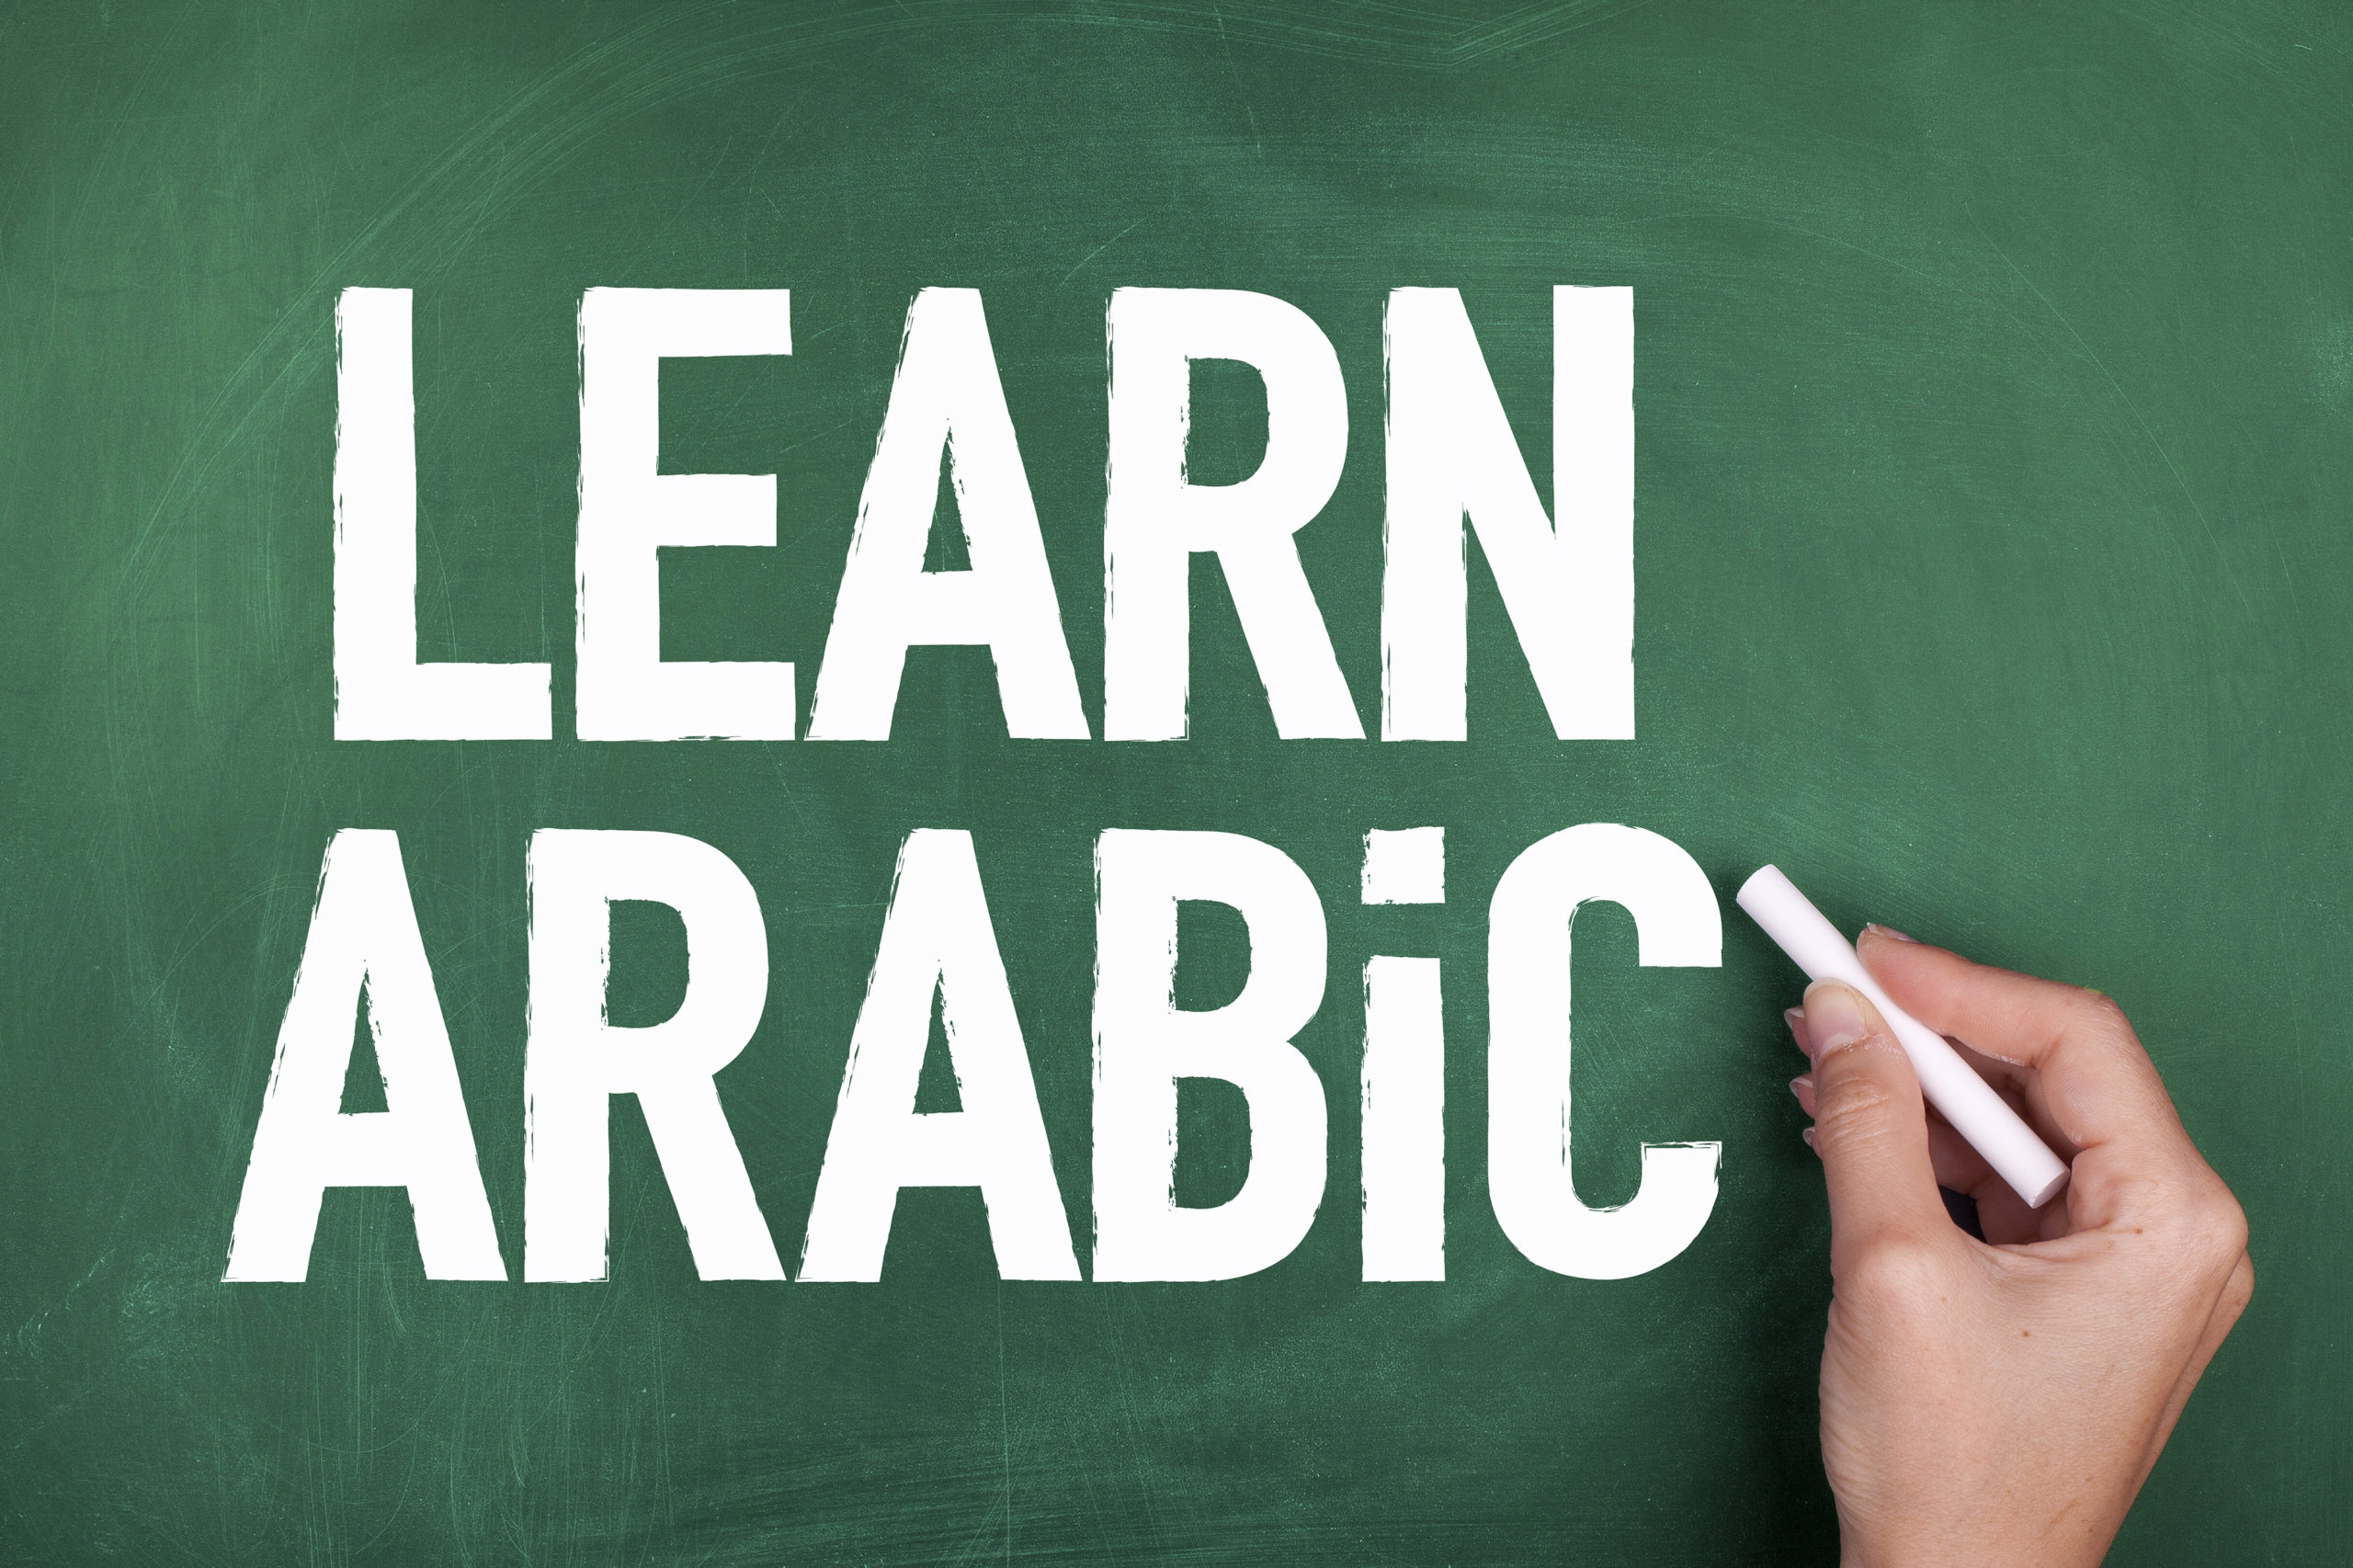 Looking for a better job? How about a more satisfying personal life? Learn Arabic language and you can reap all the benefits from becoming bilingual.